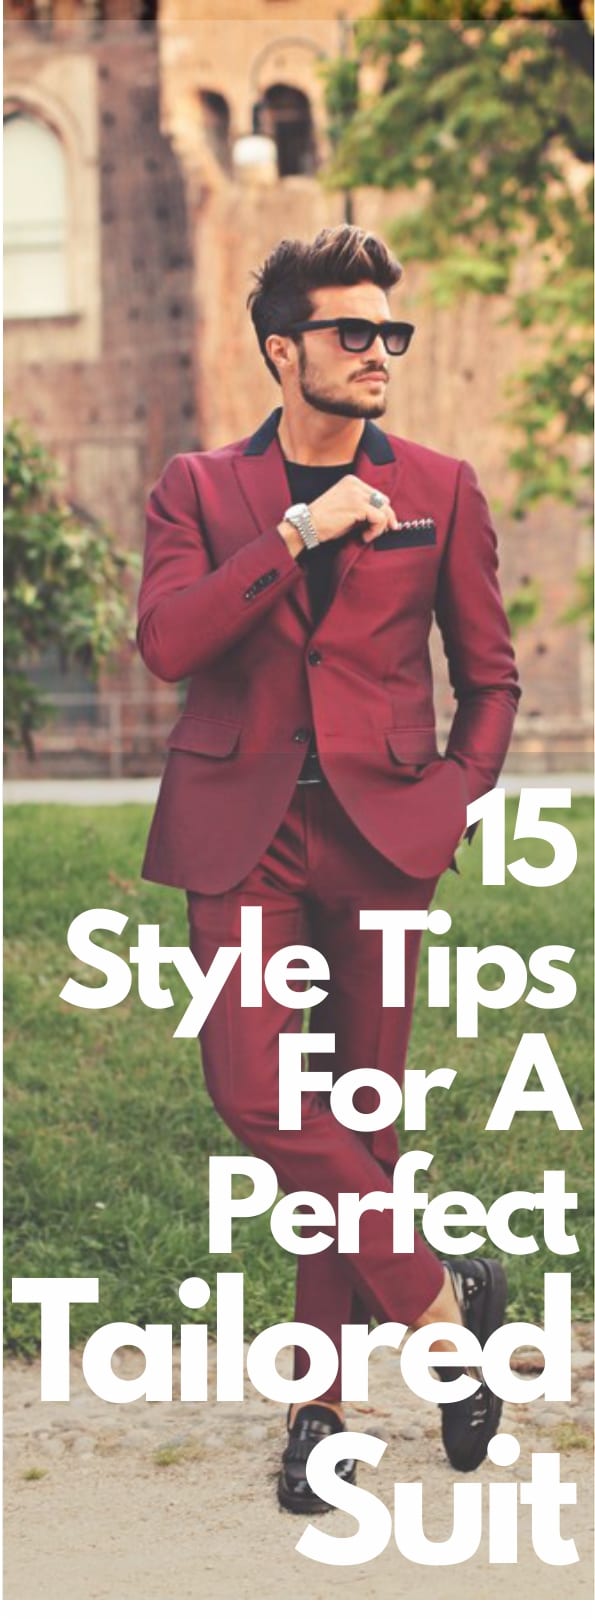 15 Style Tips For A Perfect Tailored Suit for Men